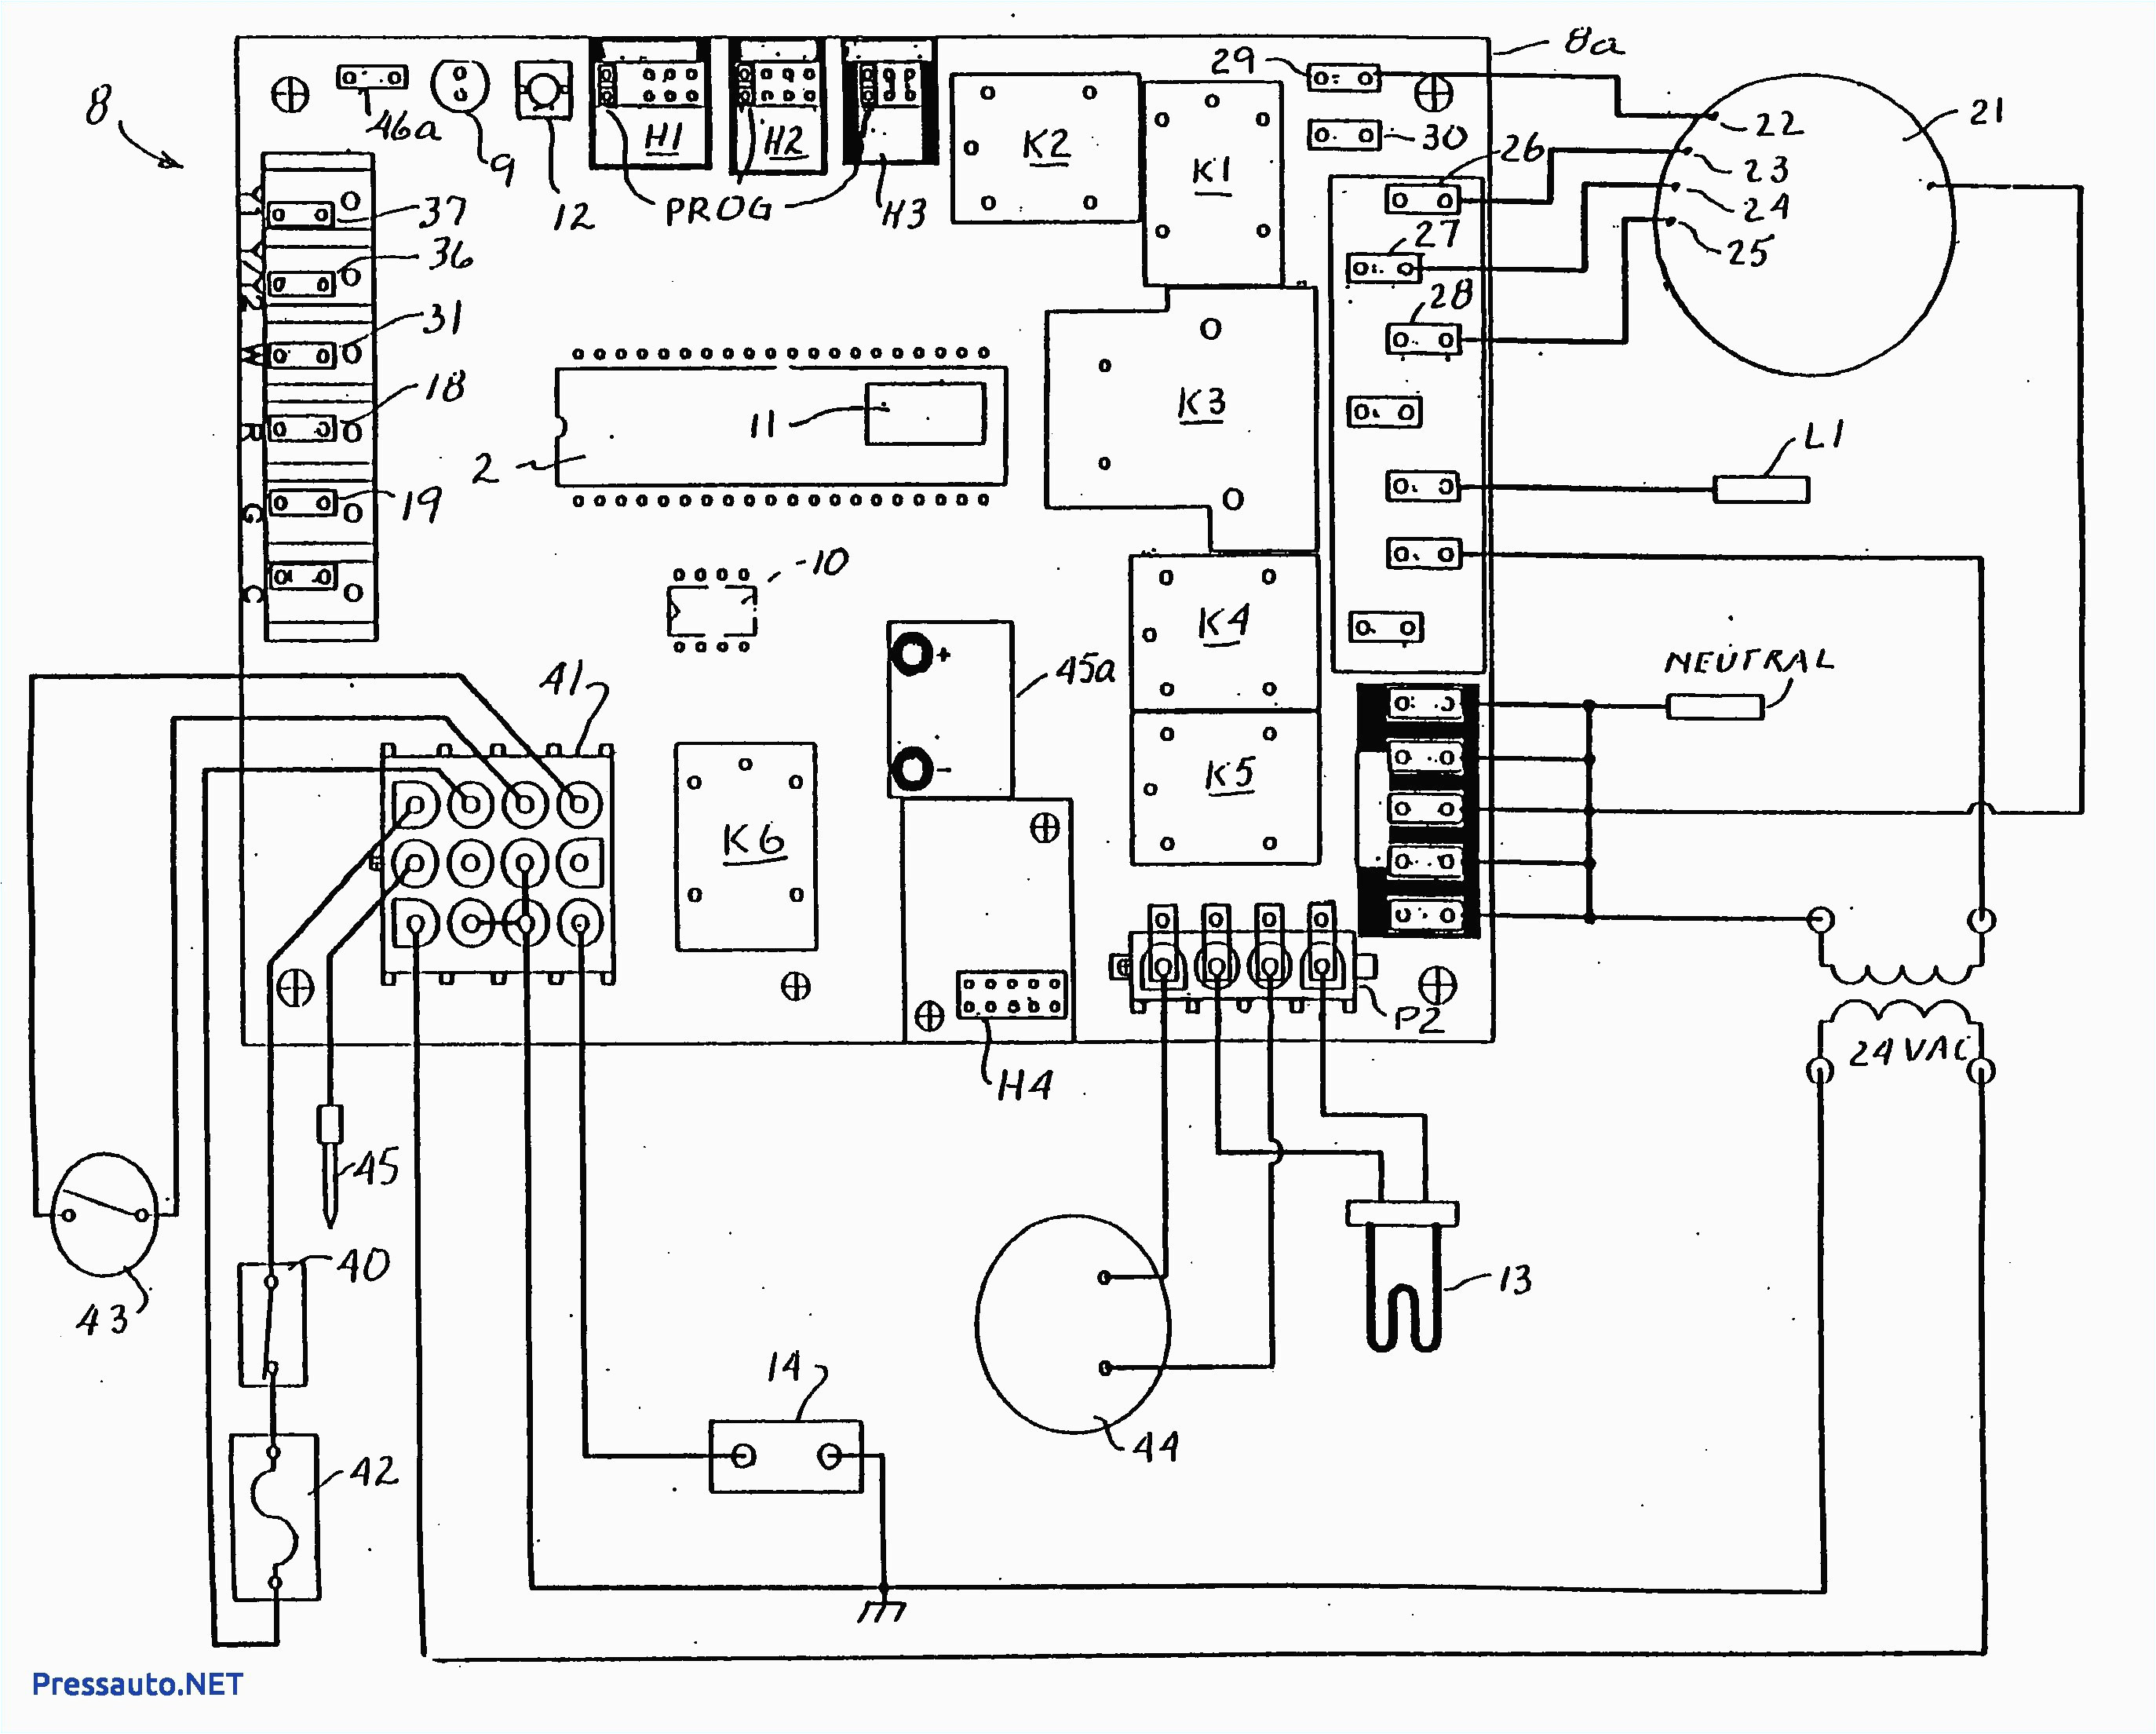 furnace wiring harness wiring diagram datasource diagram also carrier bryant furnace control board wiring harness on